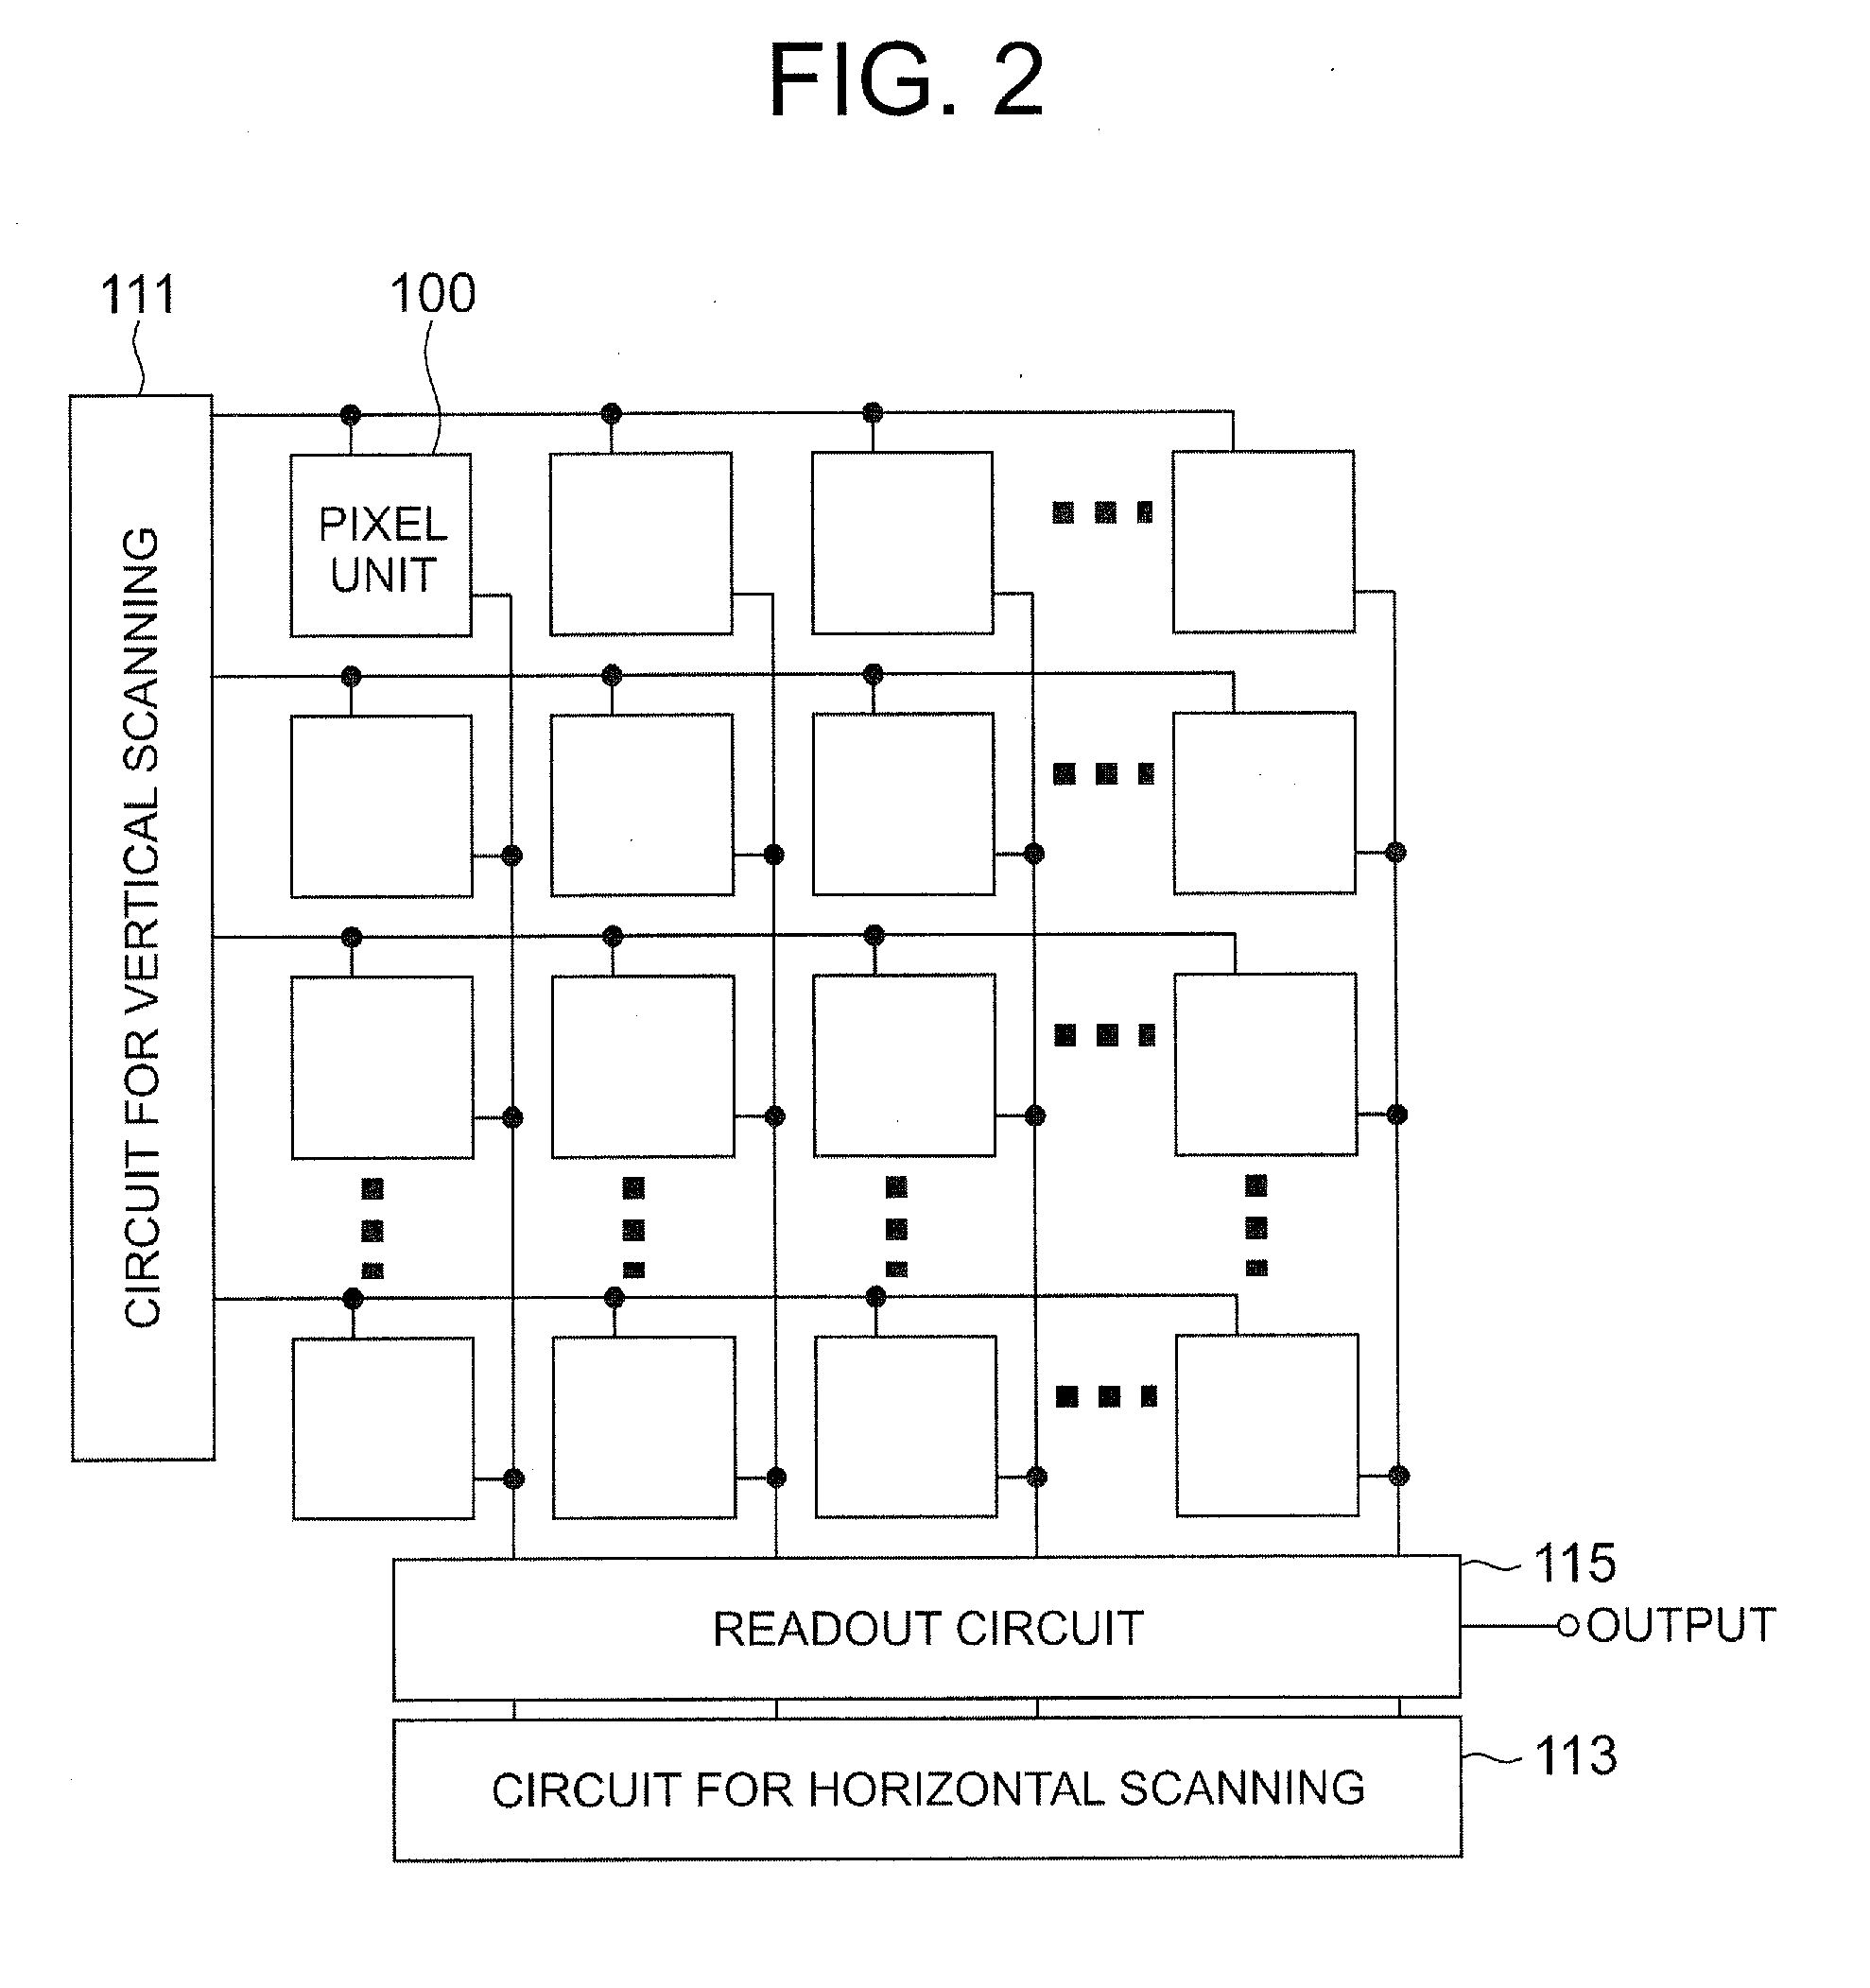 Pixel, pixel forming method, imaging device and imaging forming method